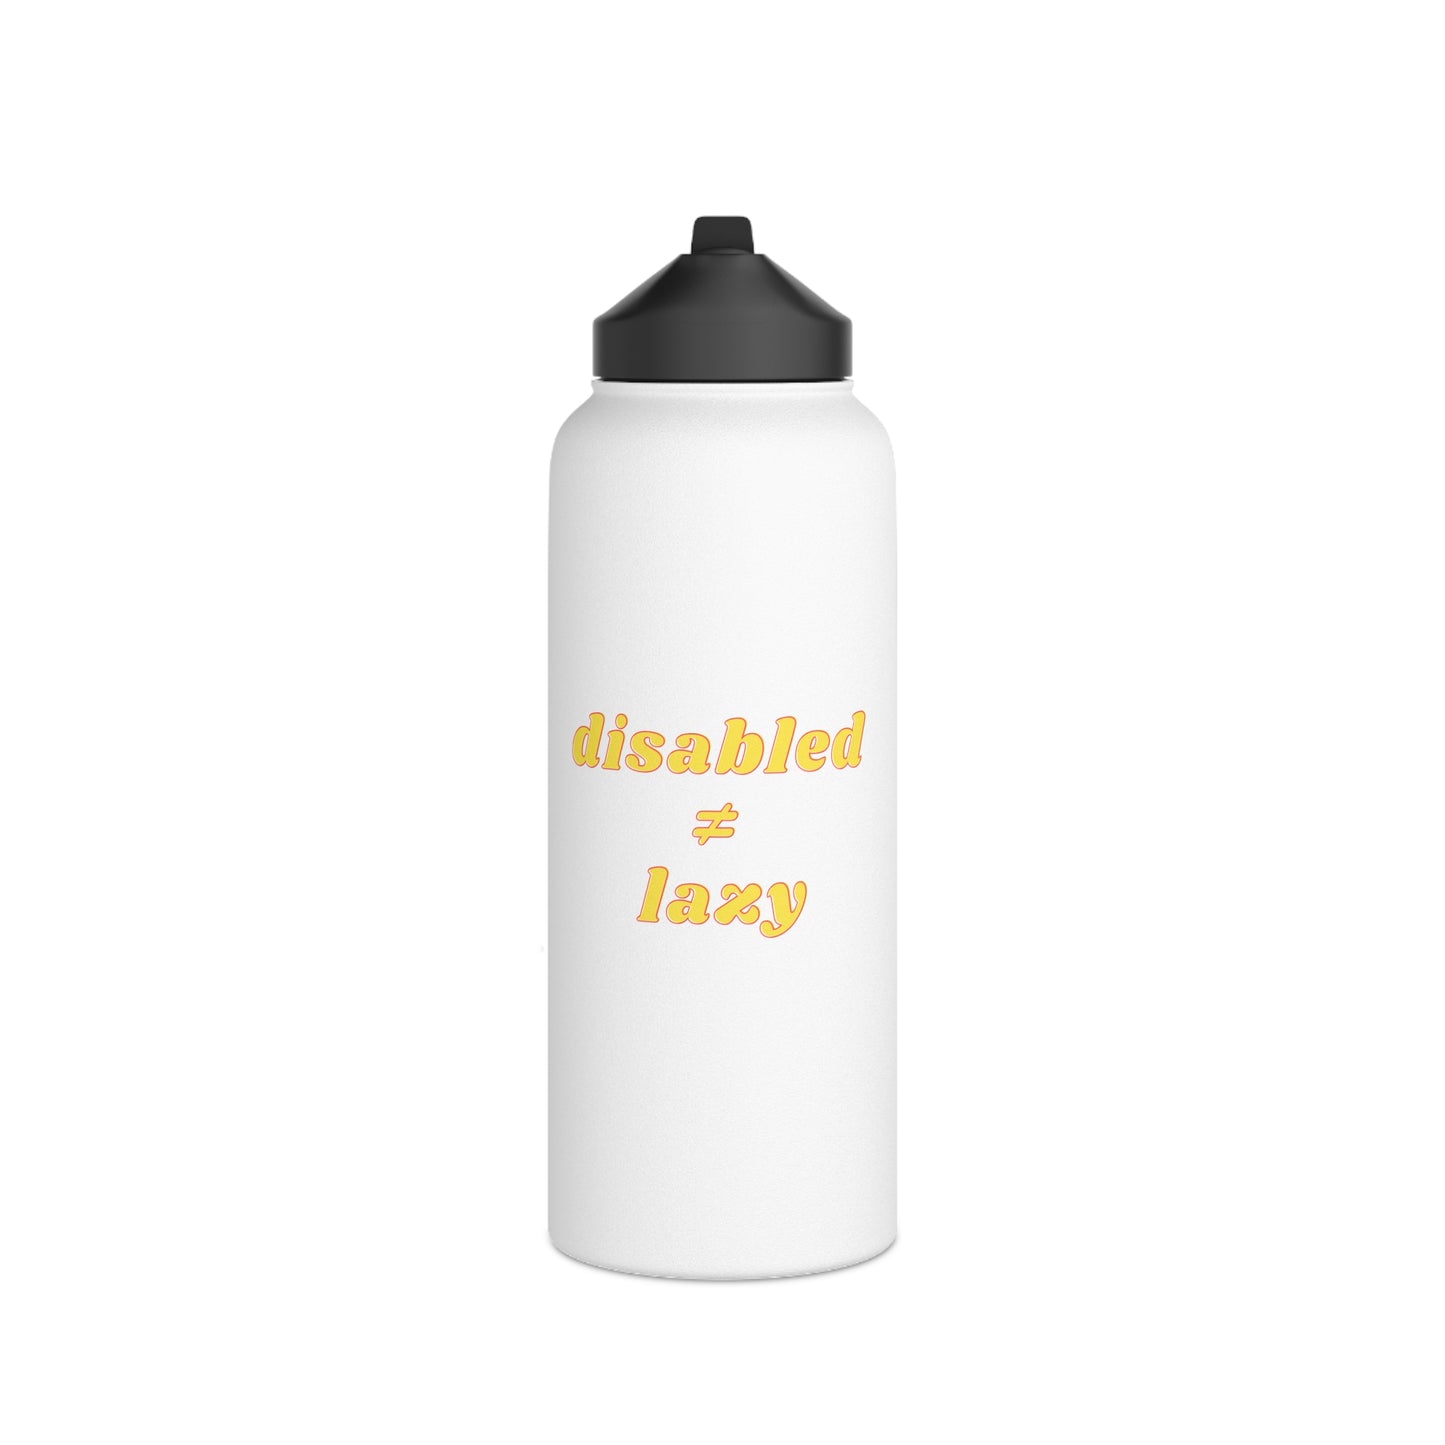 Disabled ≠ Lazy - Stainless Steel Water Bottle